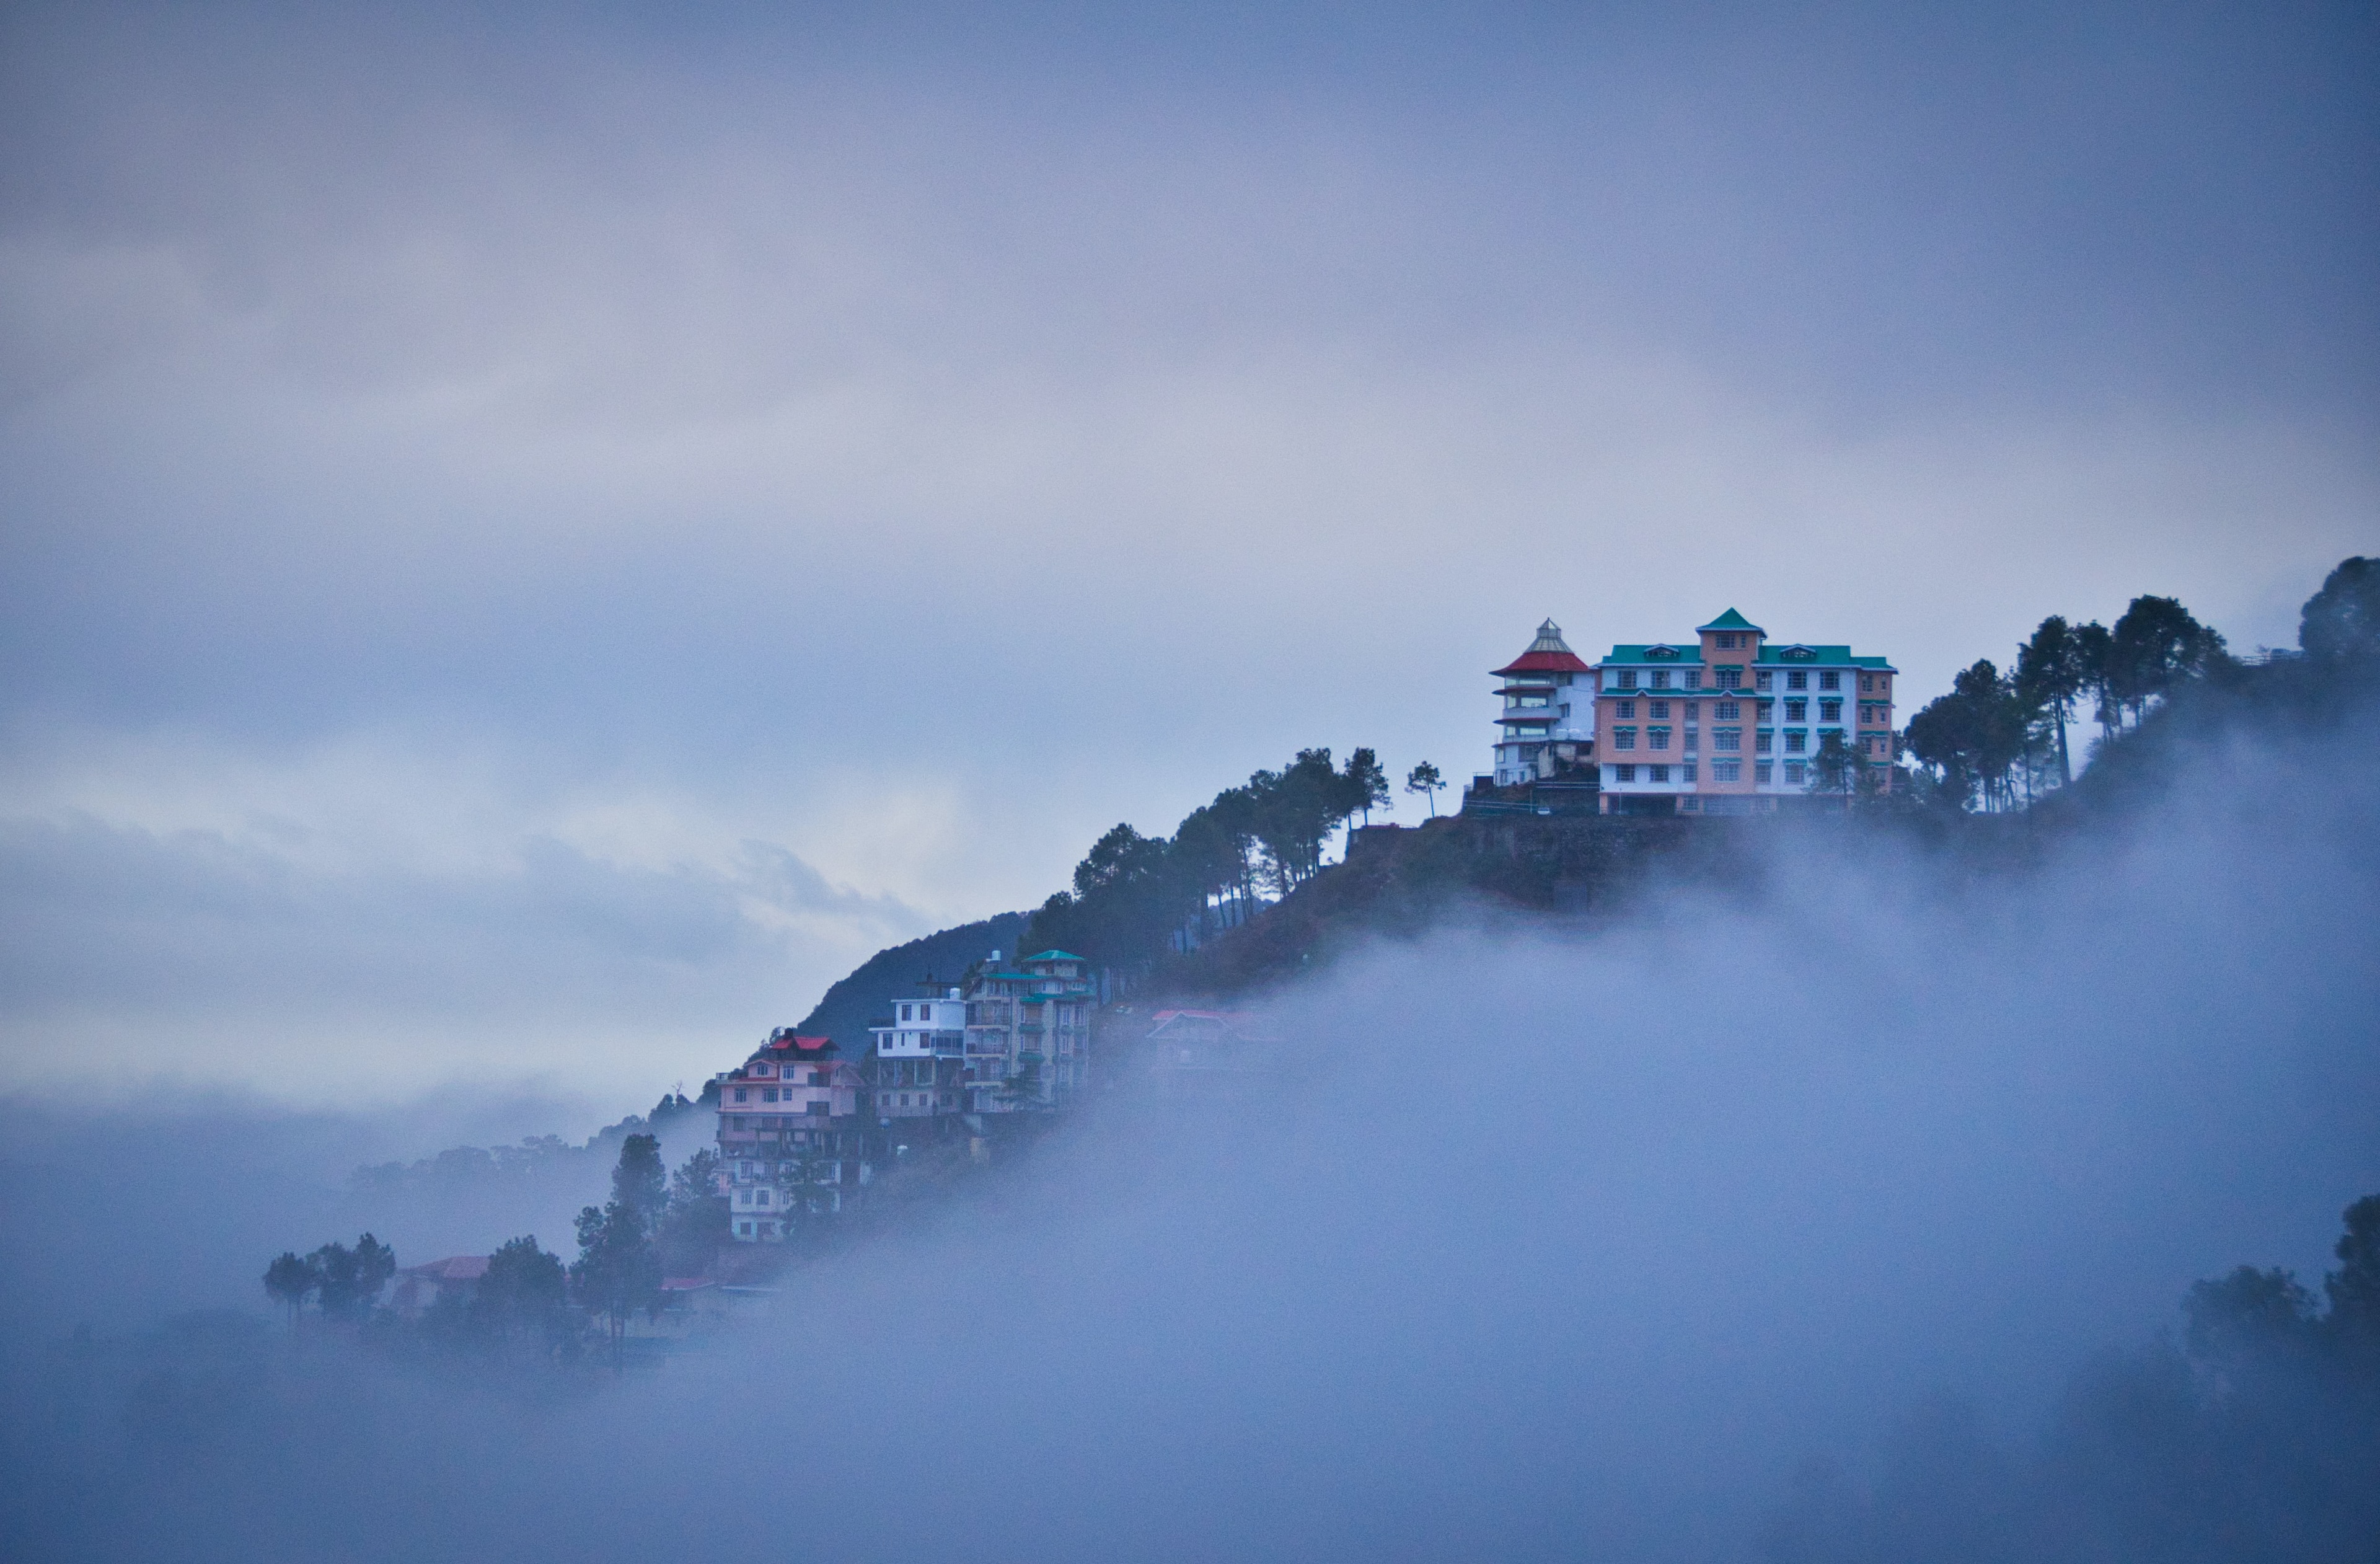 10 Things to Do in Shimla on Your Next Vacation